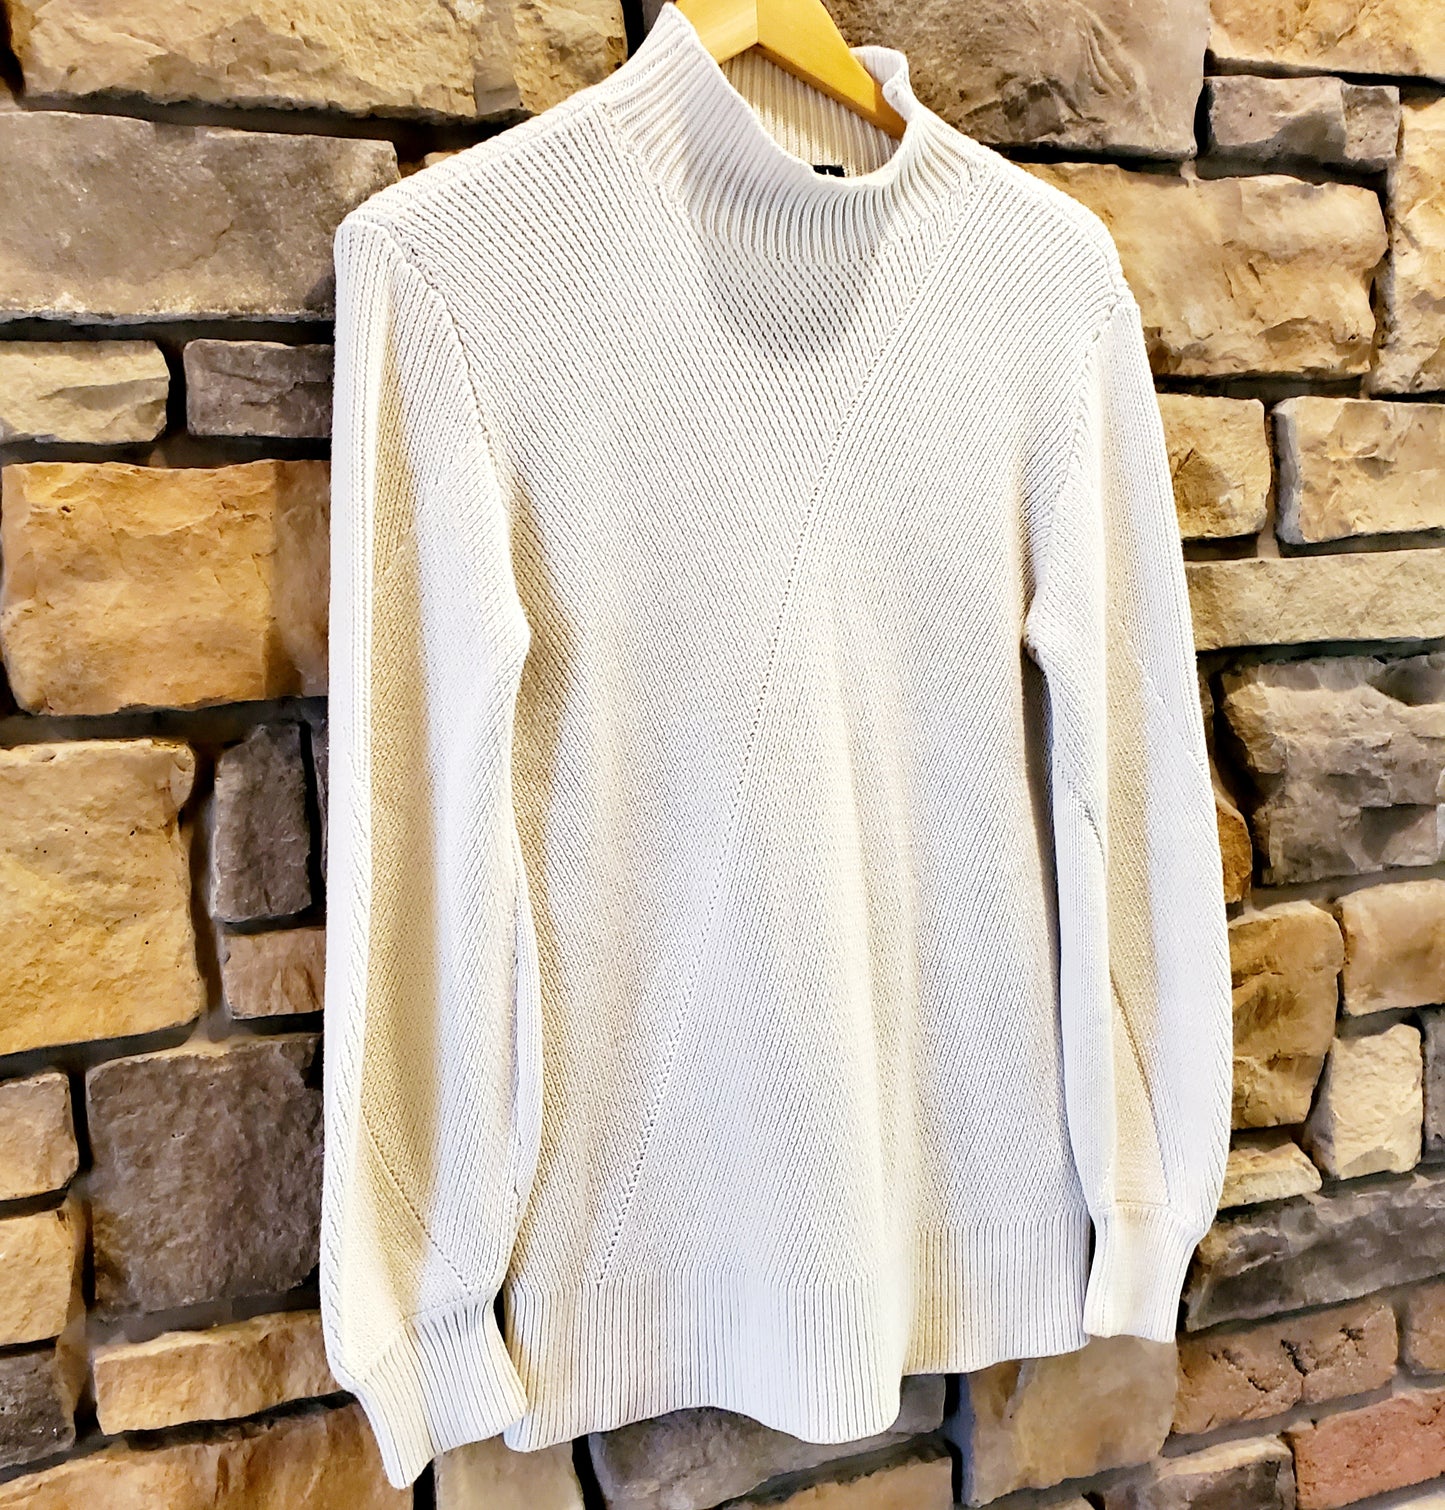 French Connection Mock Neck Blouson Sleeve Sweater - /White - S